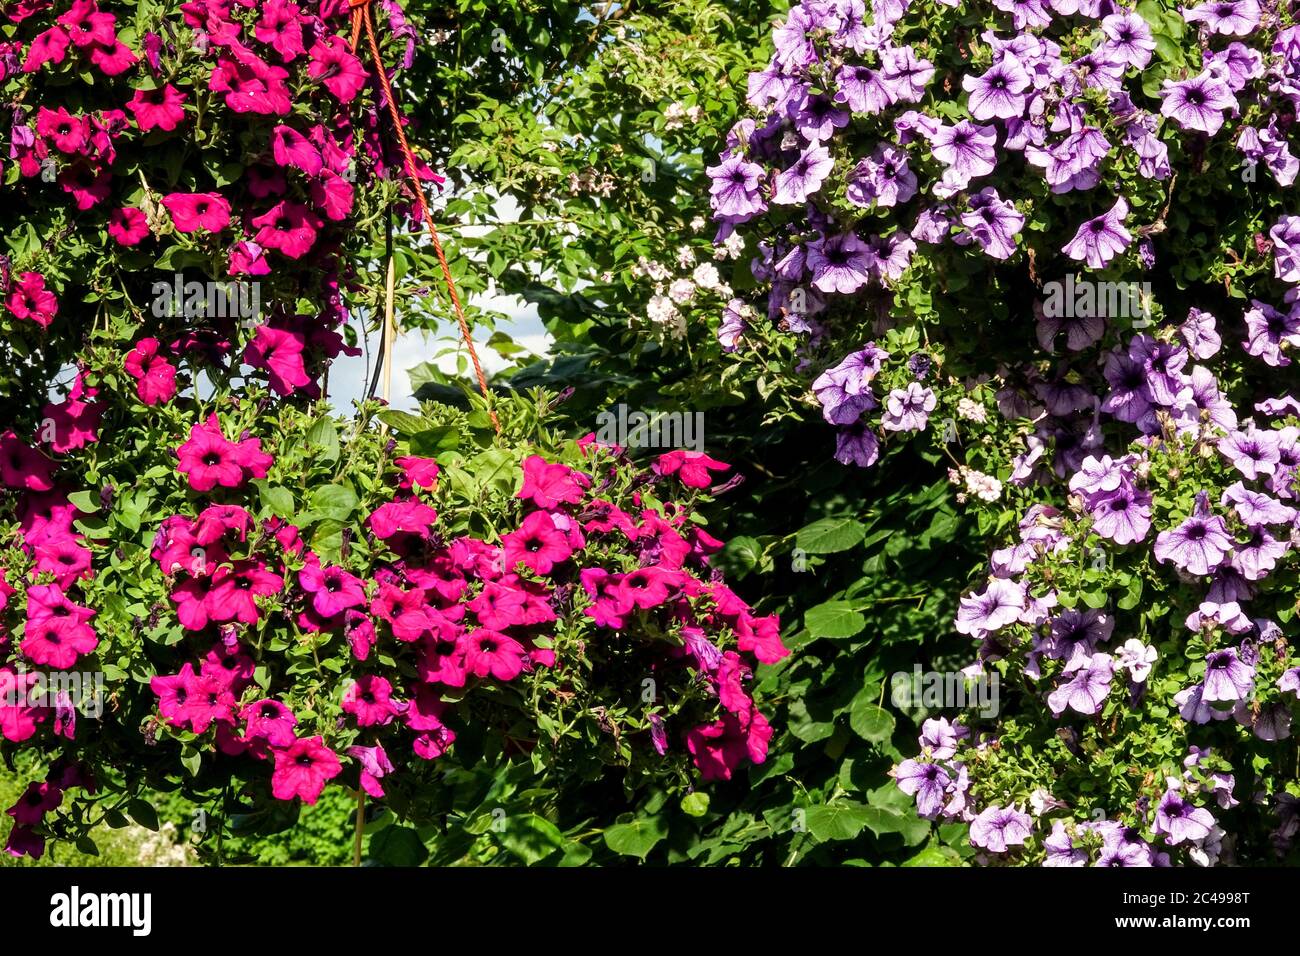 Hanging colorful plants flowers in basket Stock Photo